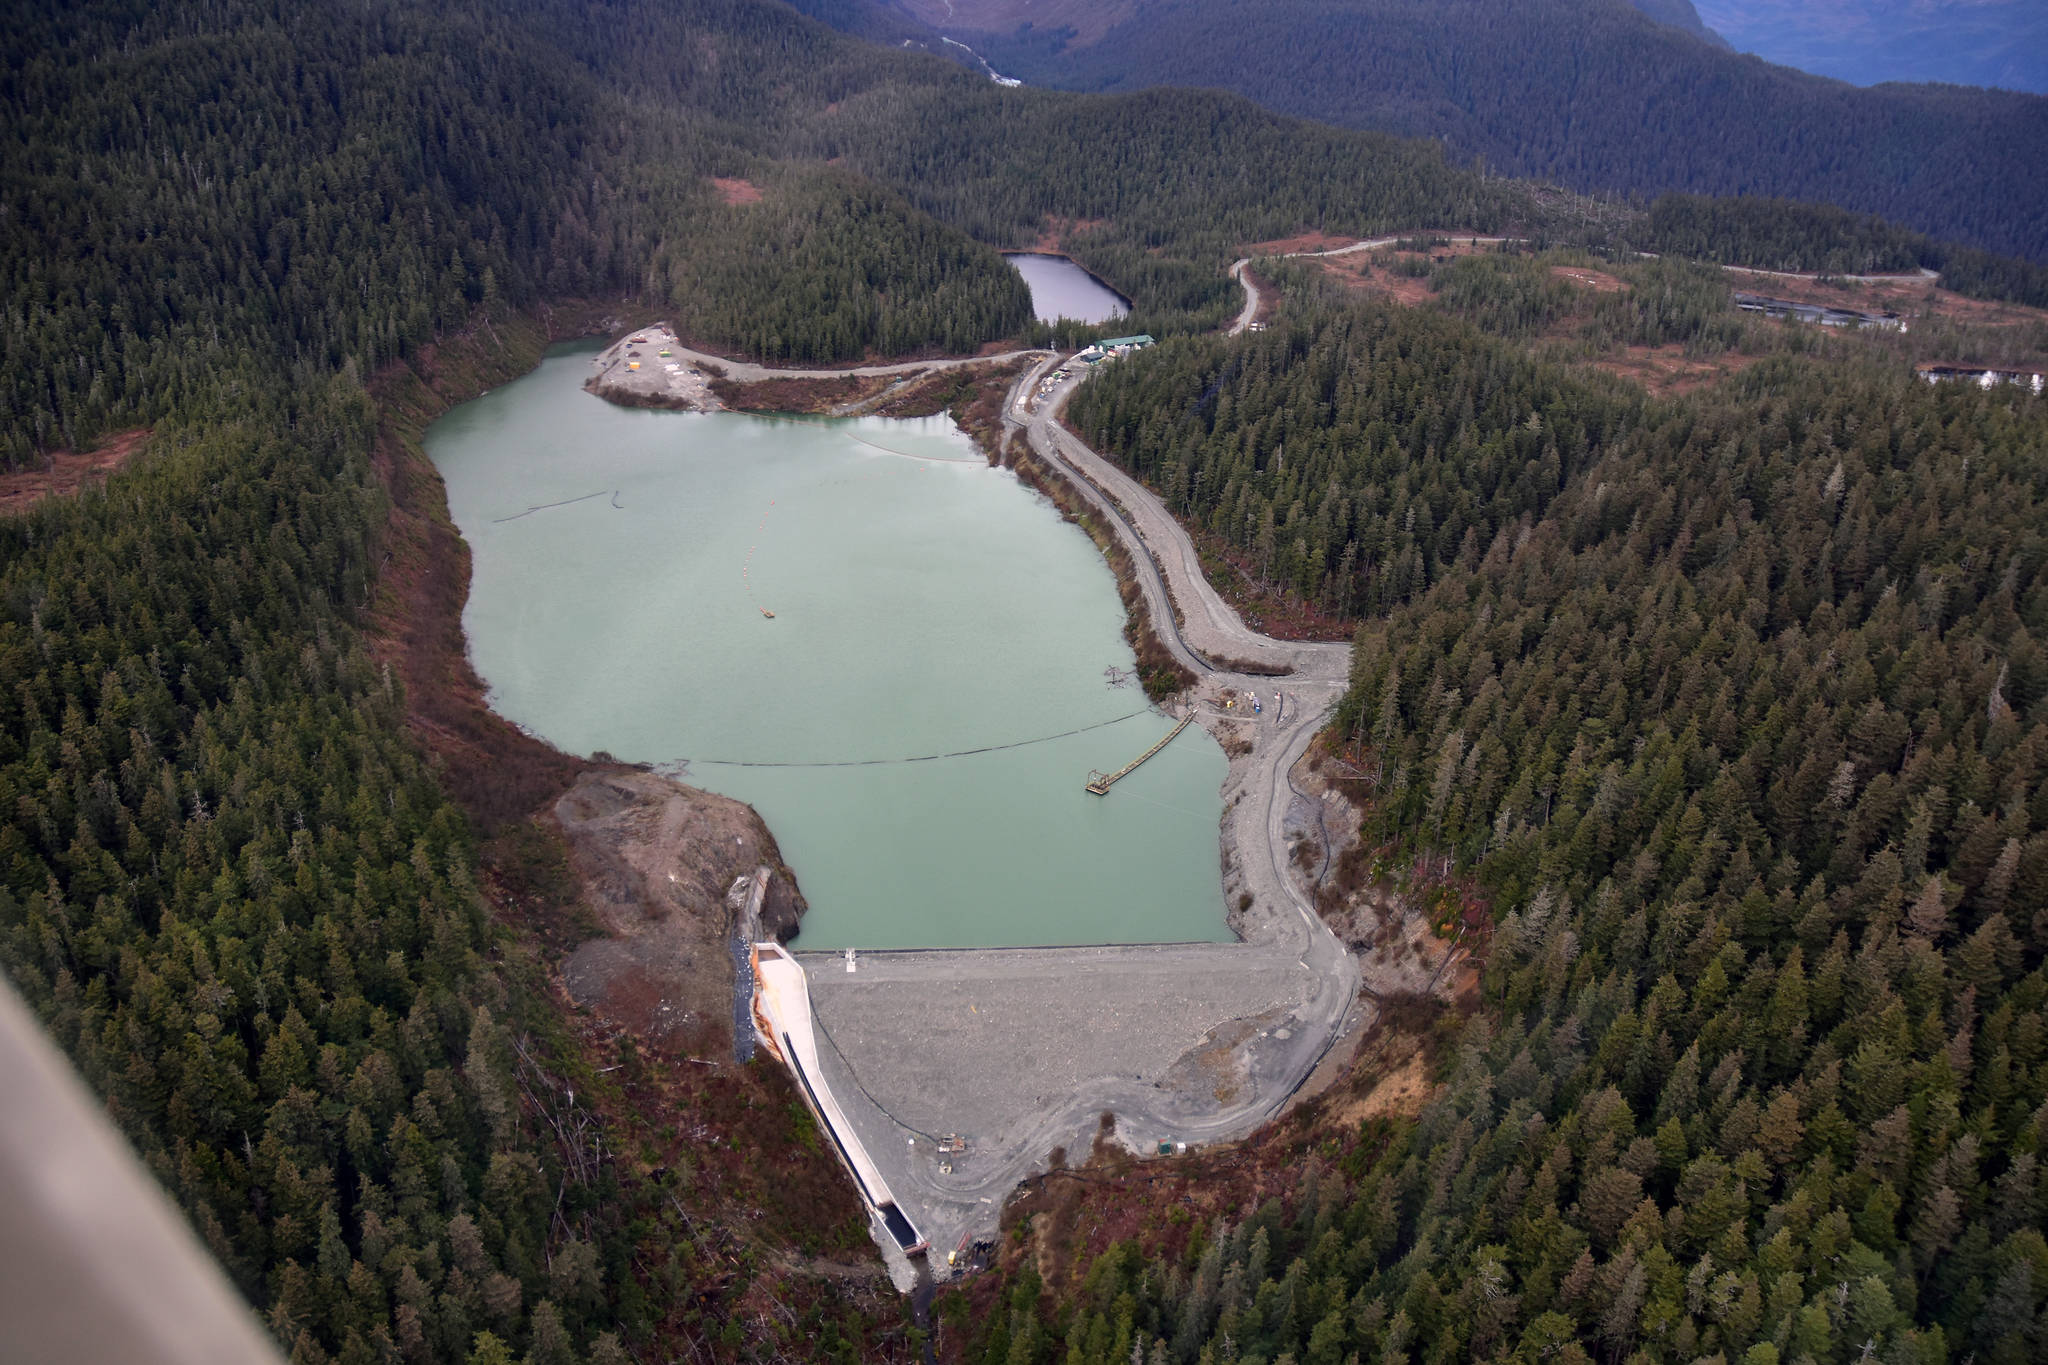 The Tailings Treatment Facility and Upper Slate Lake at the Kensington Mine on Monday, Oct. 14, 2019. The mine's owner Coeur Alaska wants to expand the life of Kengsington by at least 10 years which will require expansion of the lake which is a concern to environmentalists. (Peter Segall / Juneau Empire File)